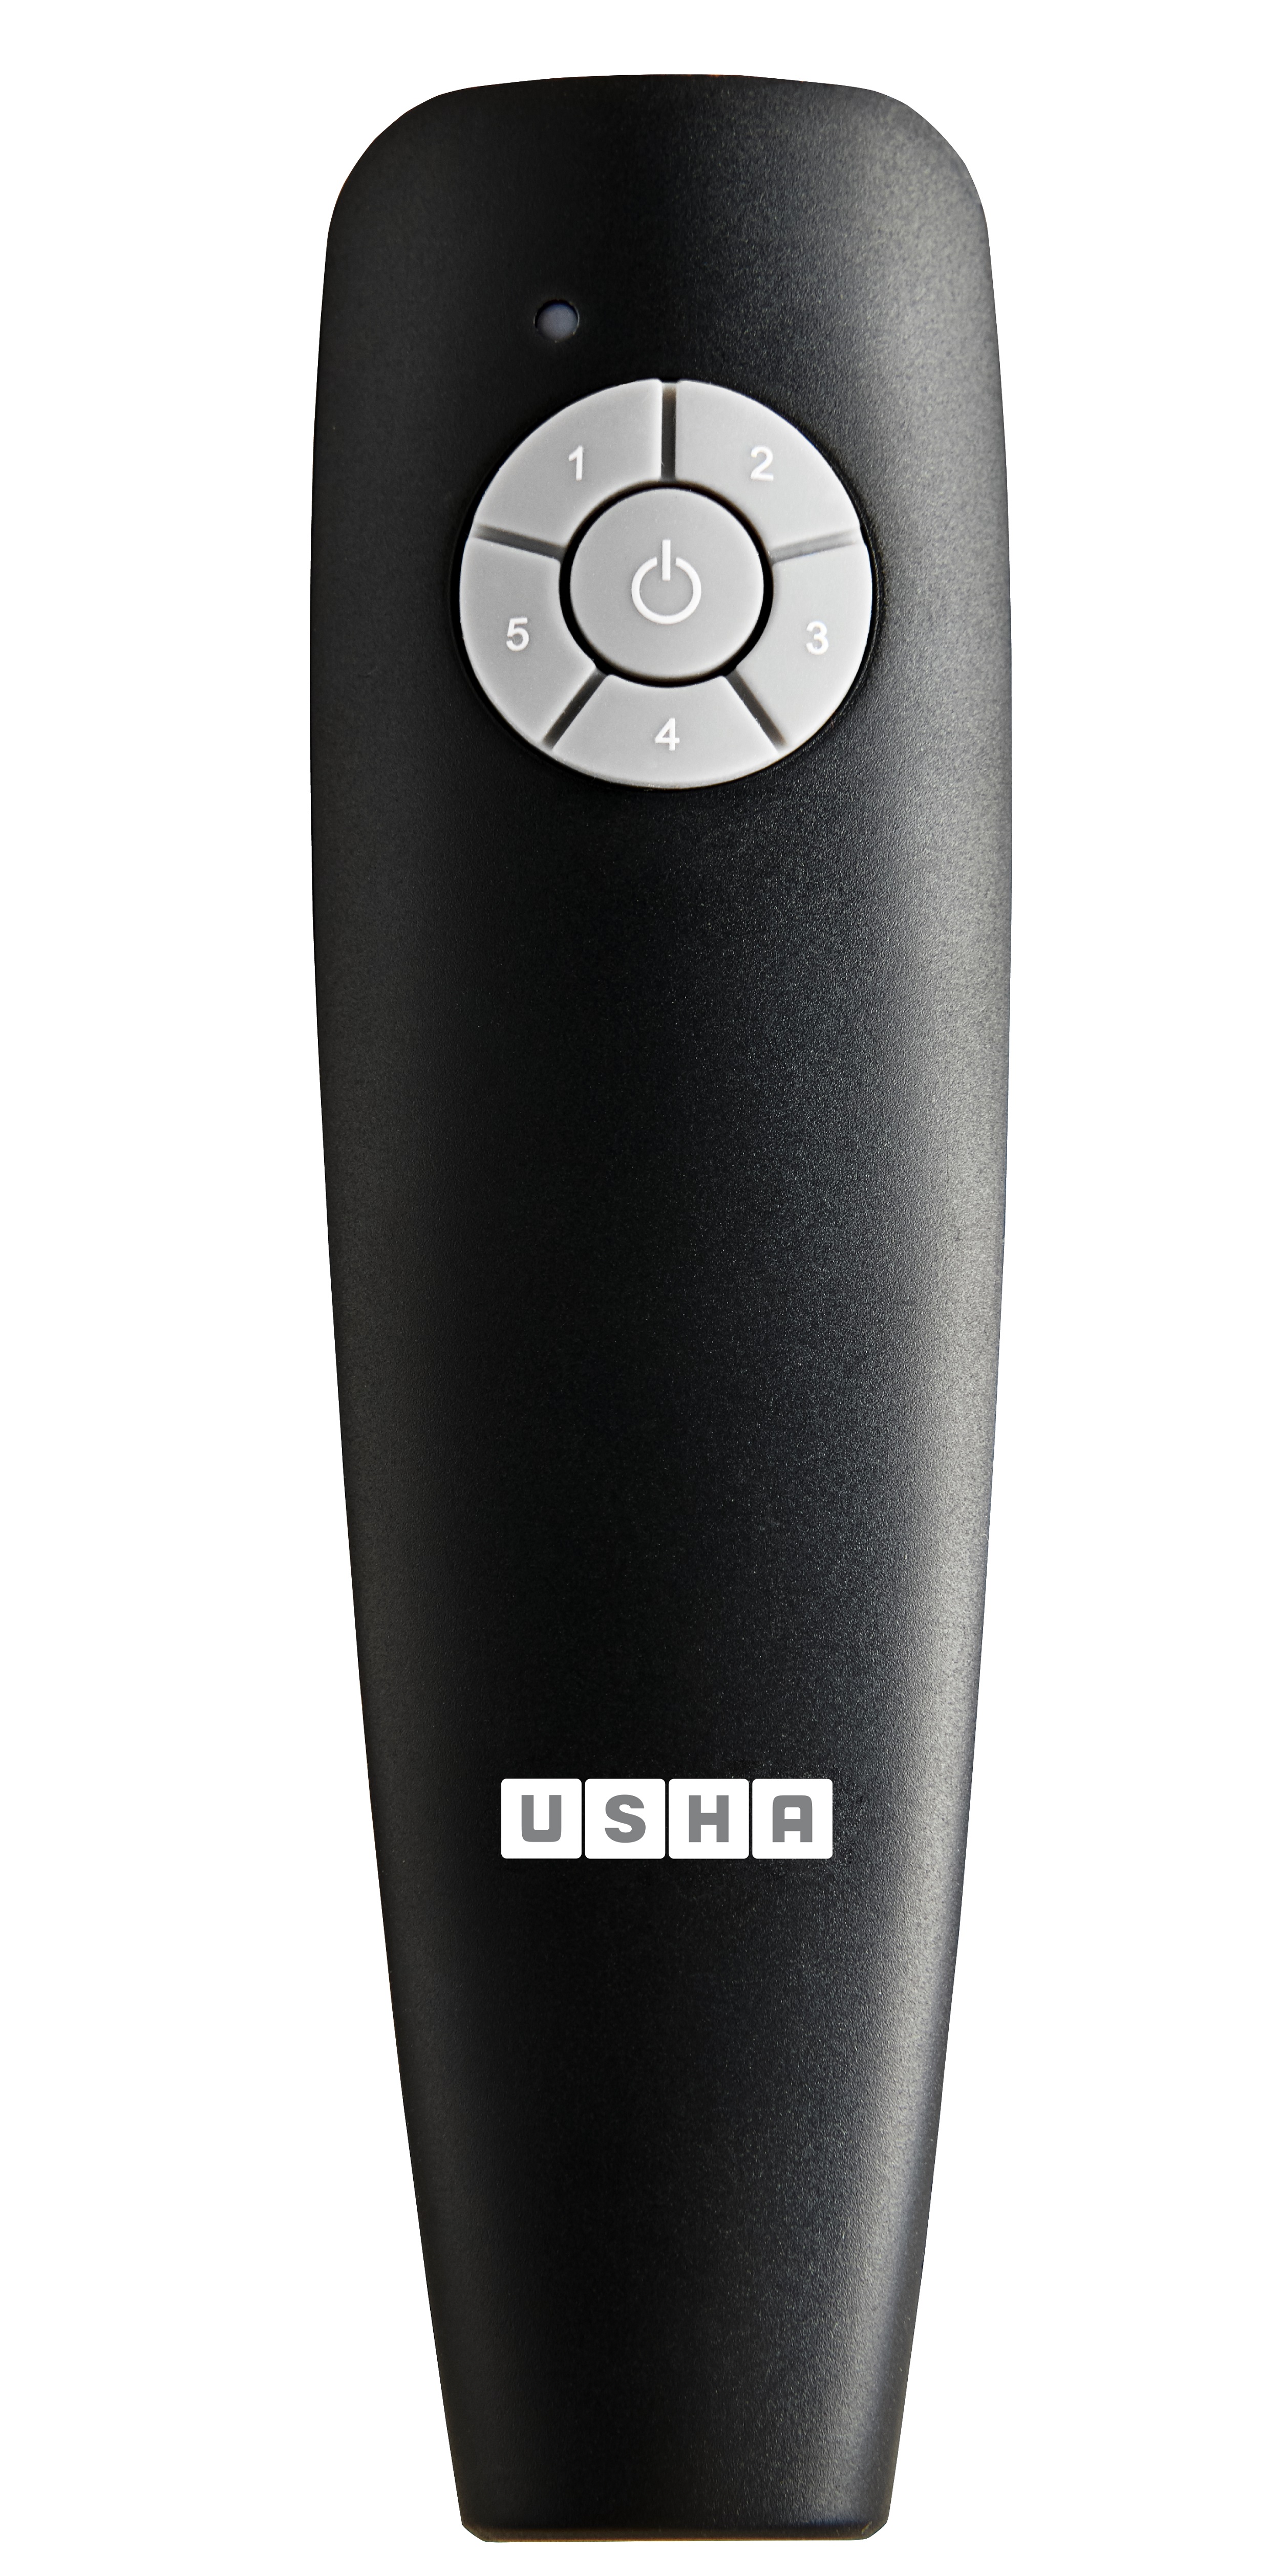 Usha introduces new Aero Switch remote control for fans